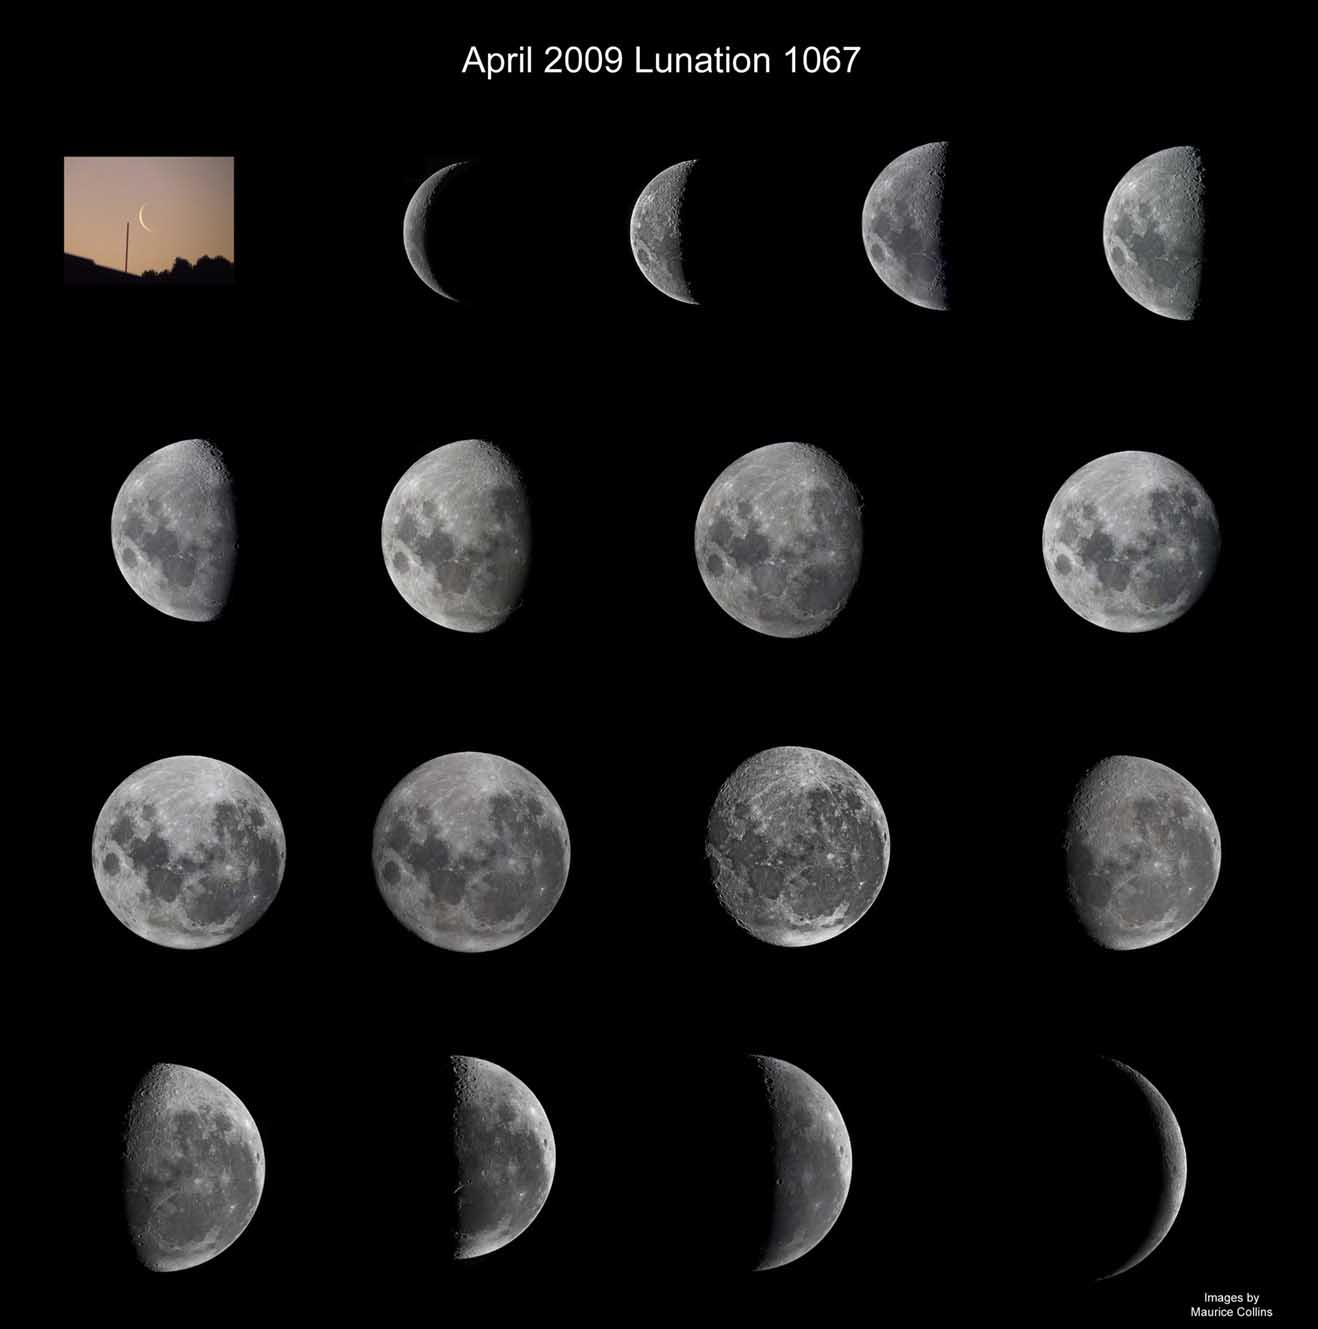 Royal Astronomical Society of New Zealand - Lunar Phases